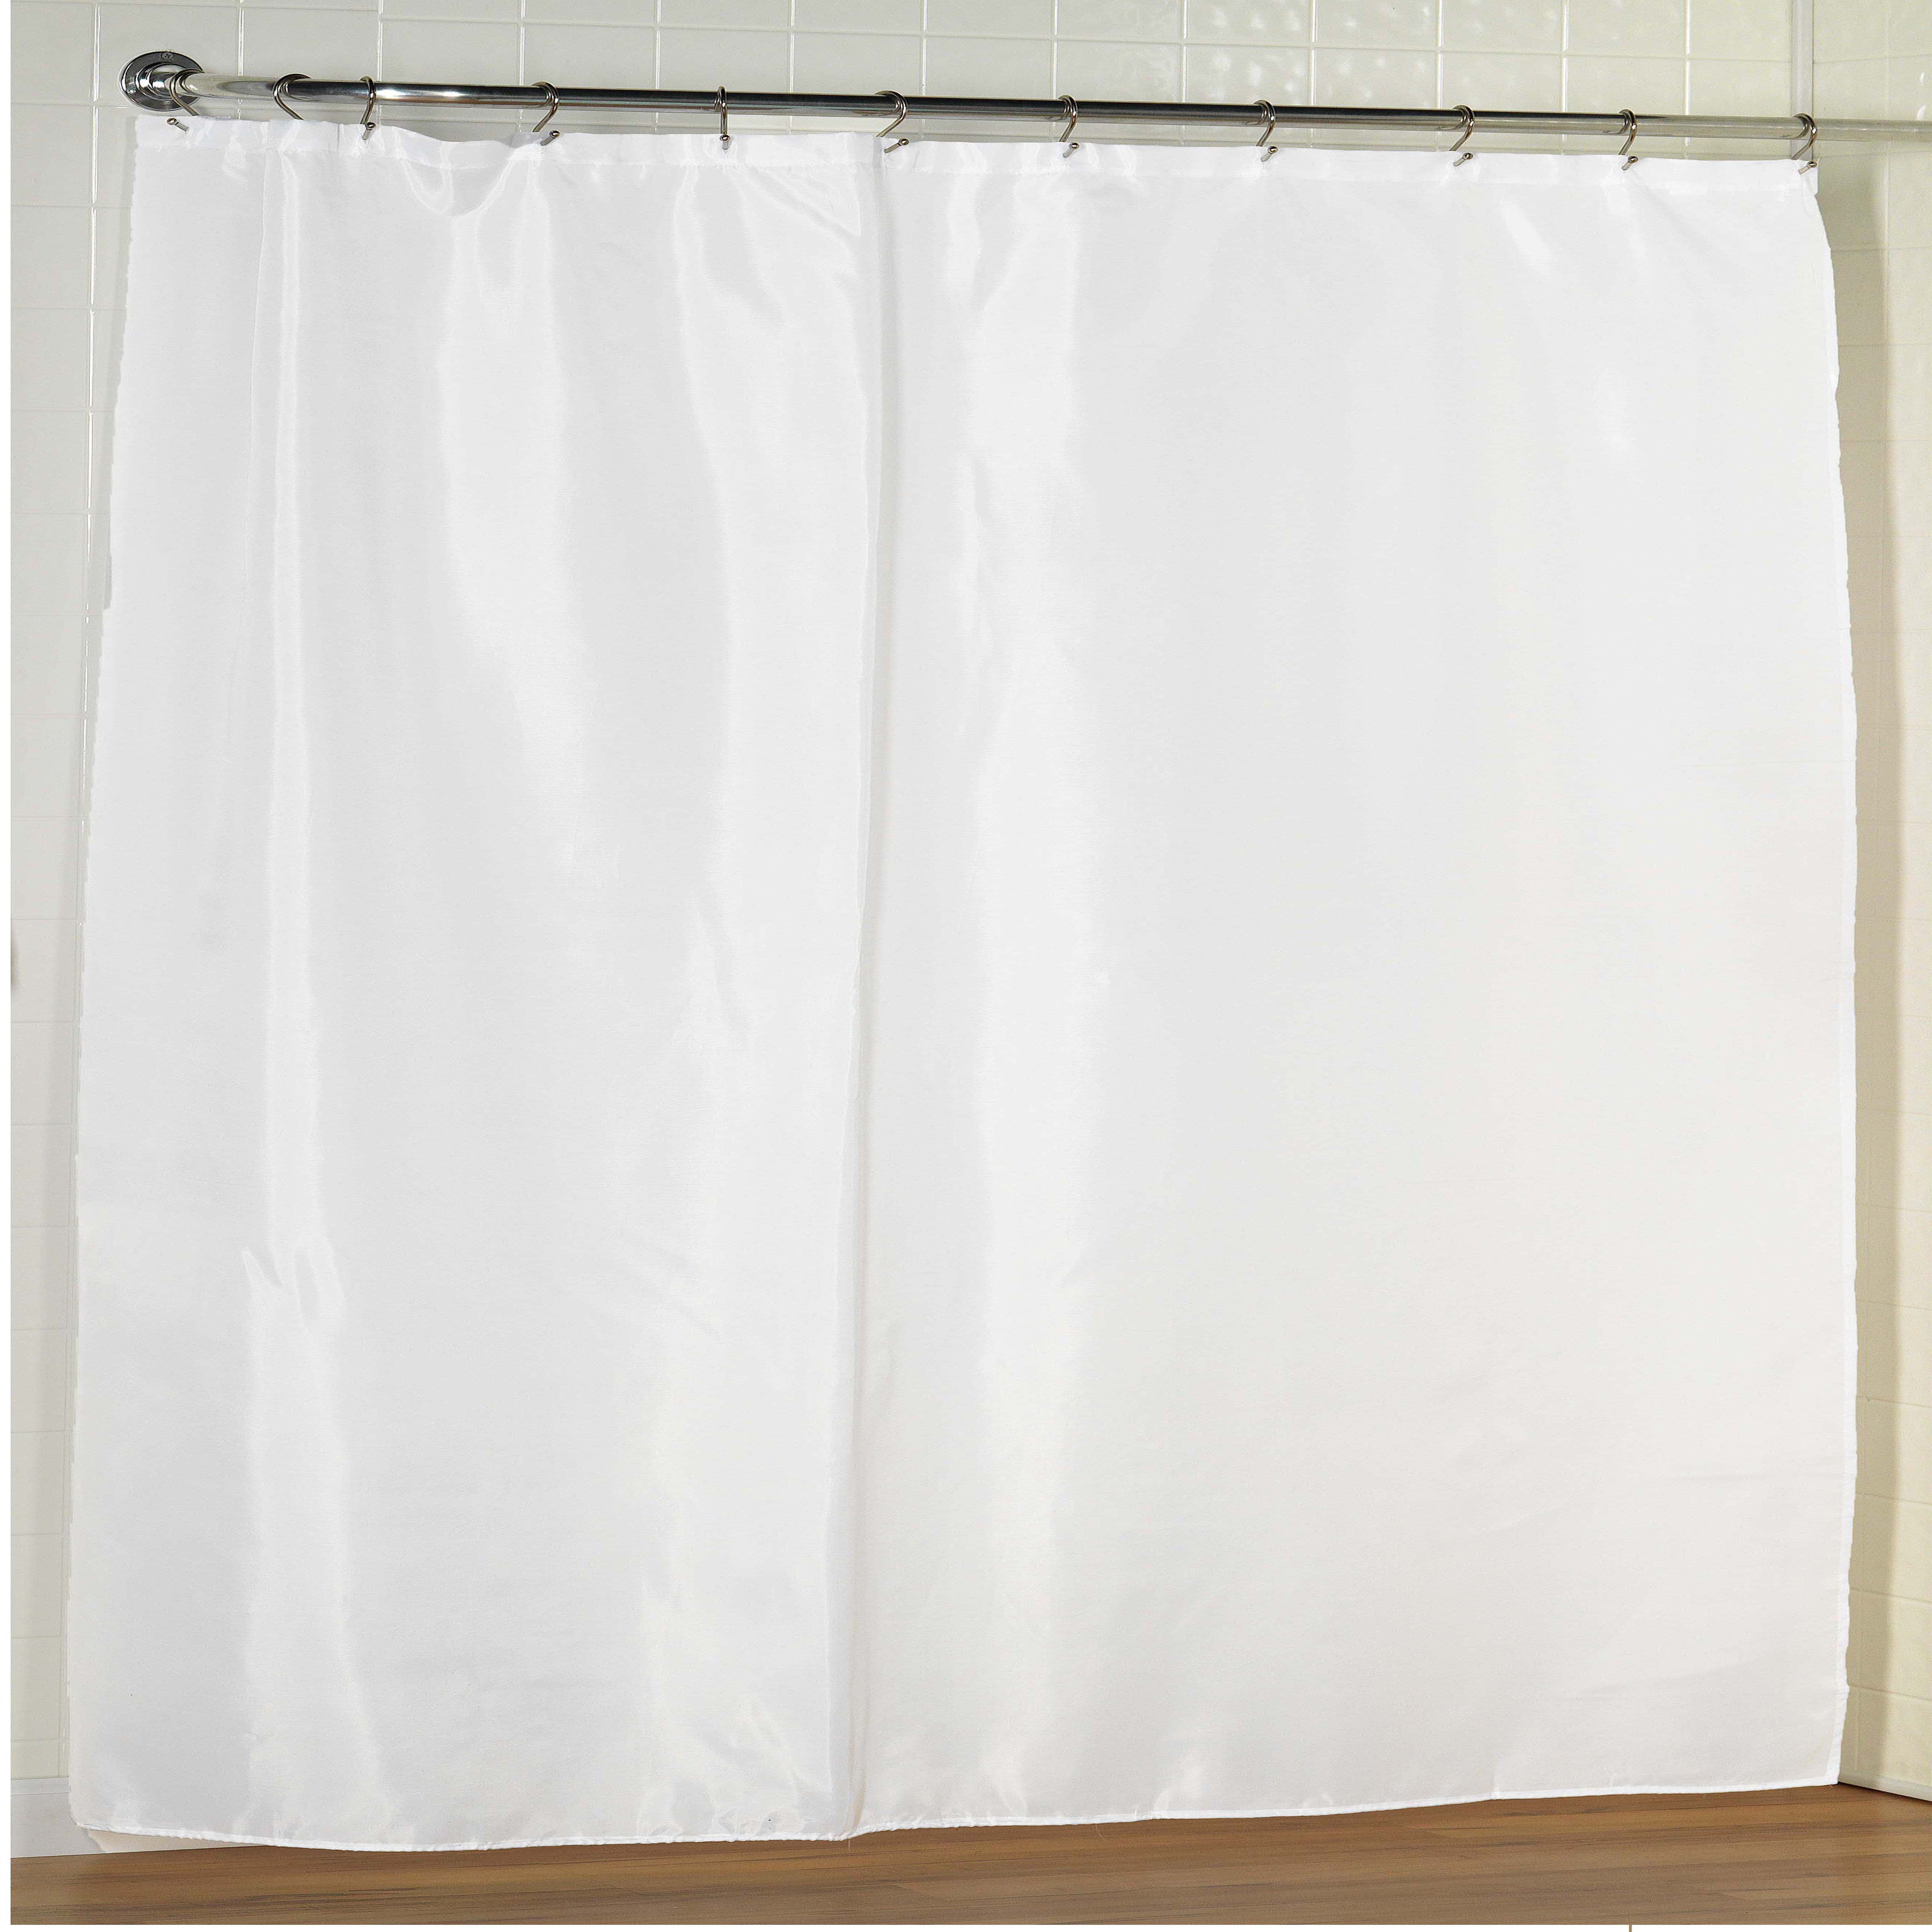 White Extra Wide Fabric Shower Curtain, 108 Shower Curtain Fabric